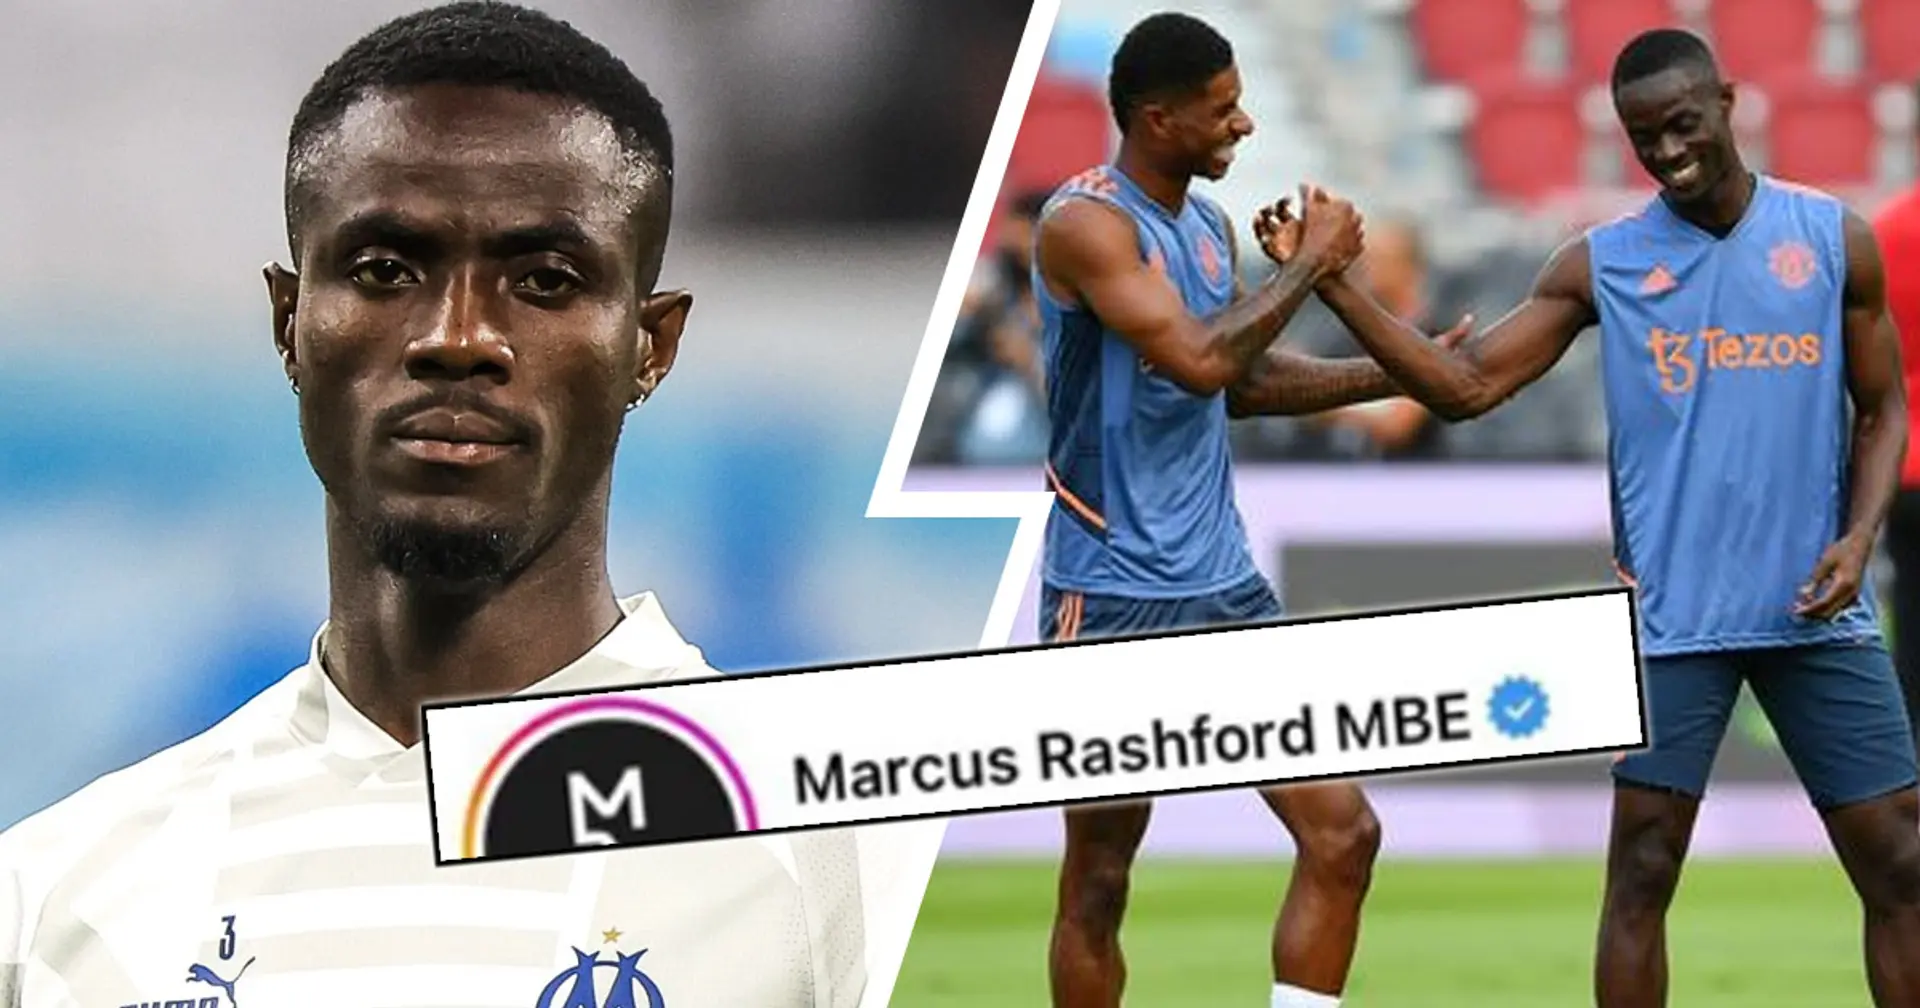 'This can make my day': Bailly reveals heartwarming Instagram DM from Rashford